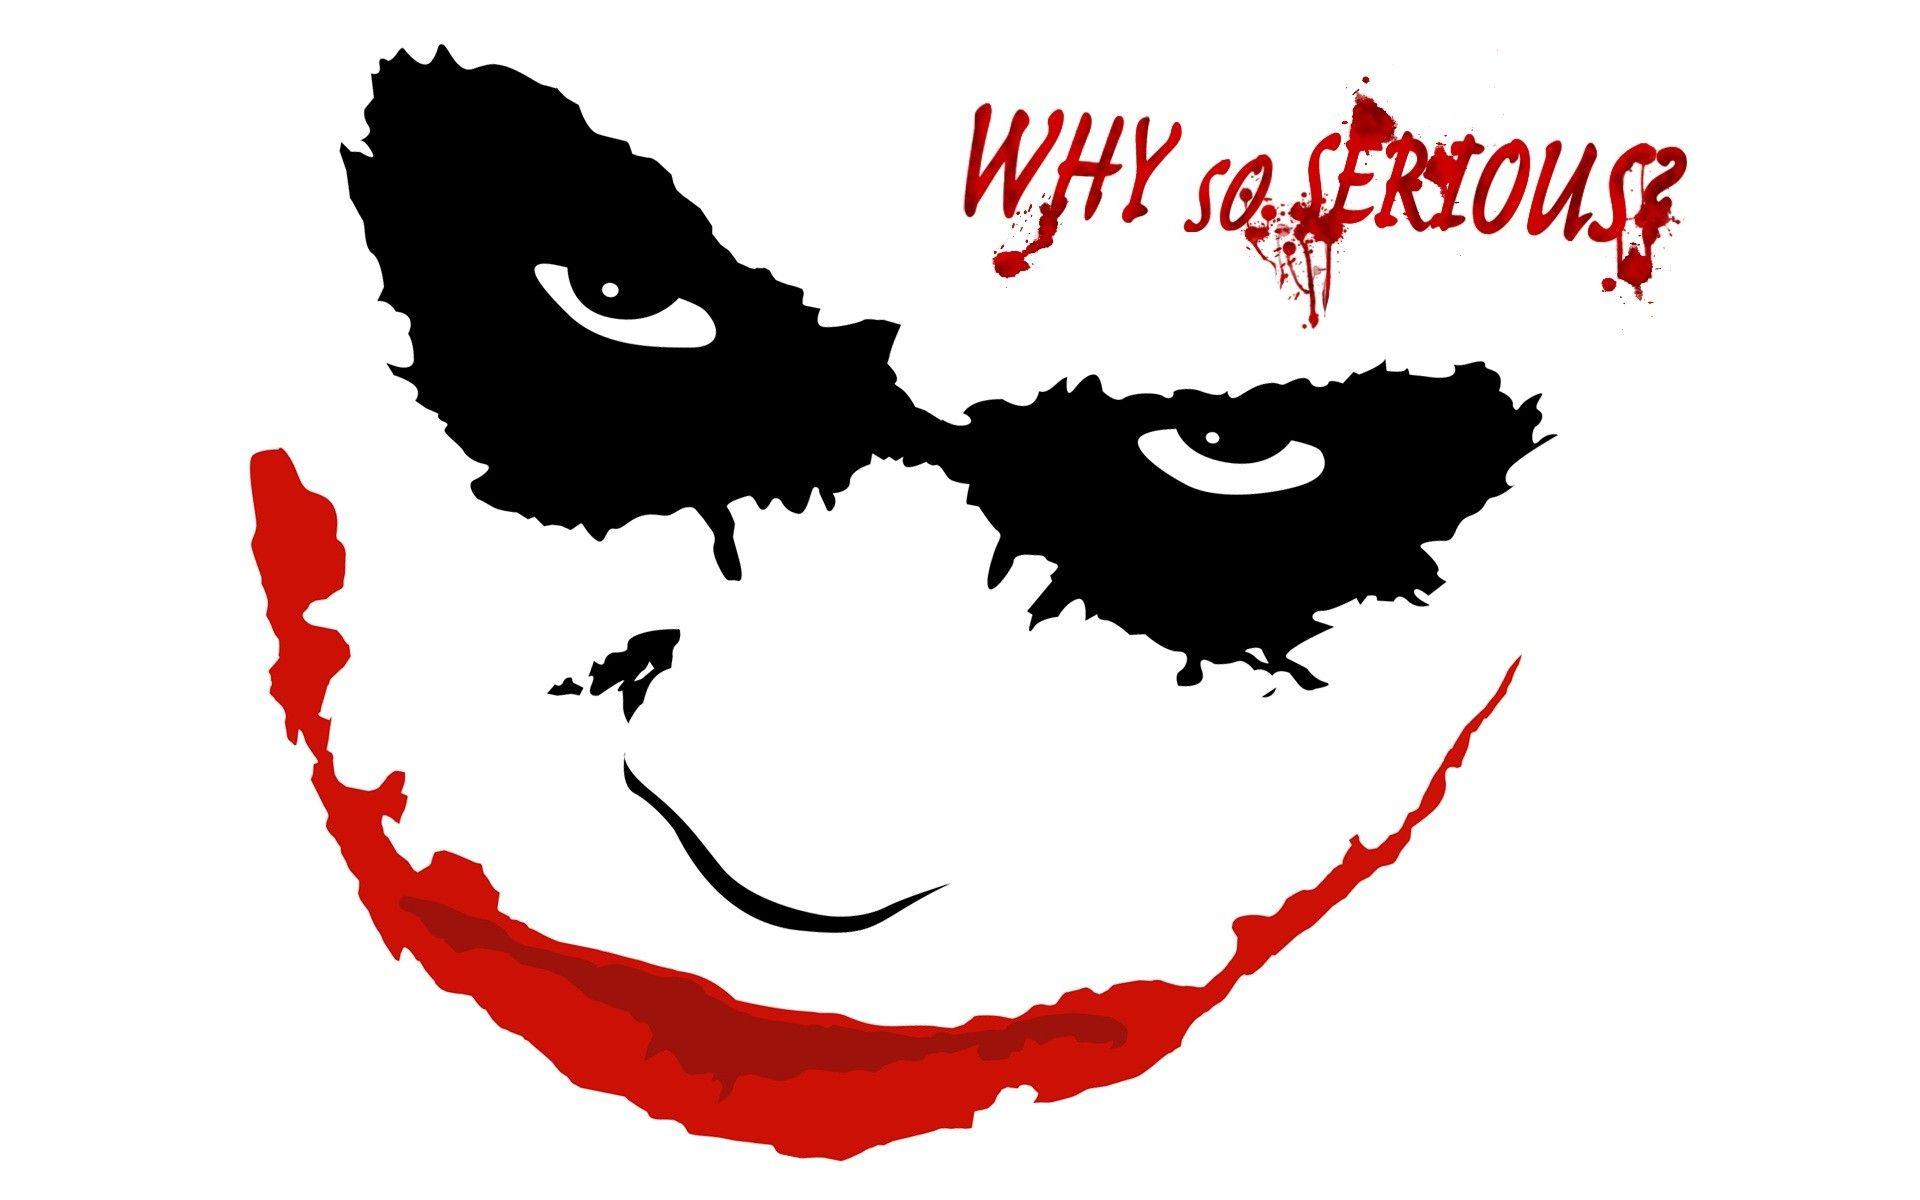 The Image of The Joker Batman The Dark Knight Why So Serious